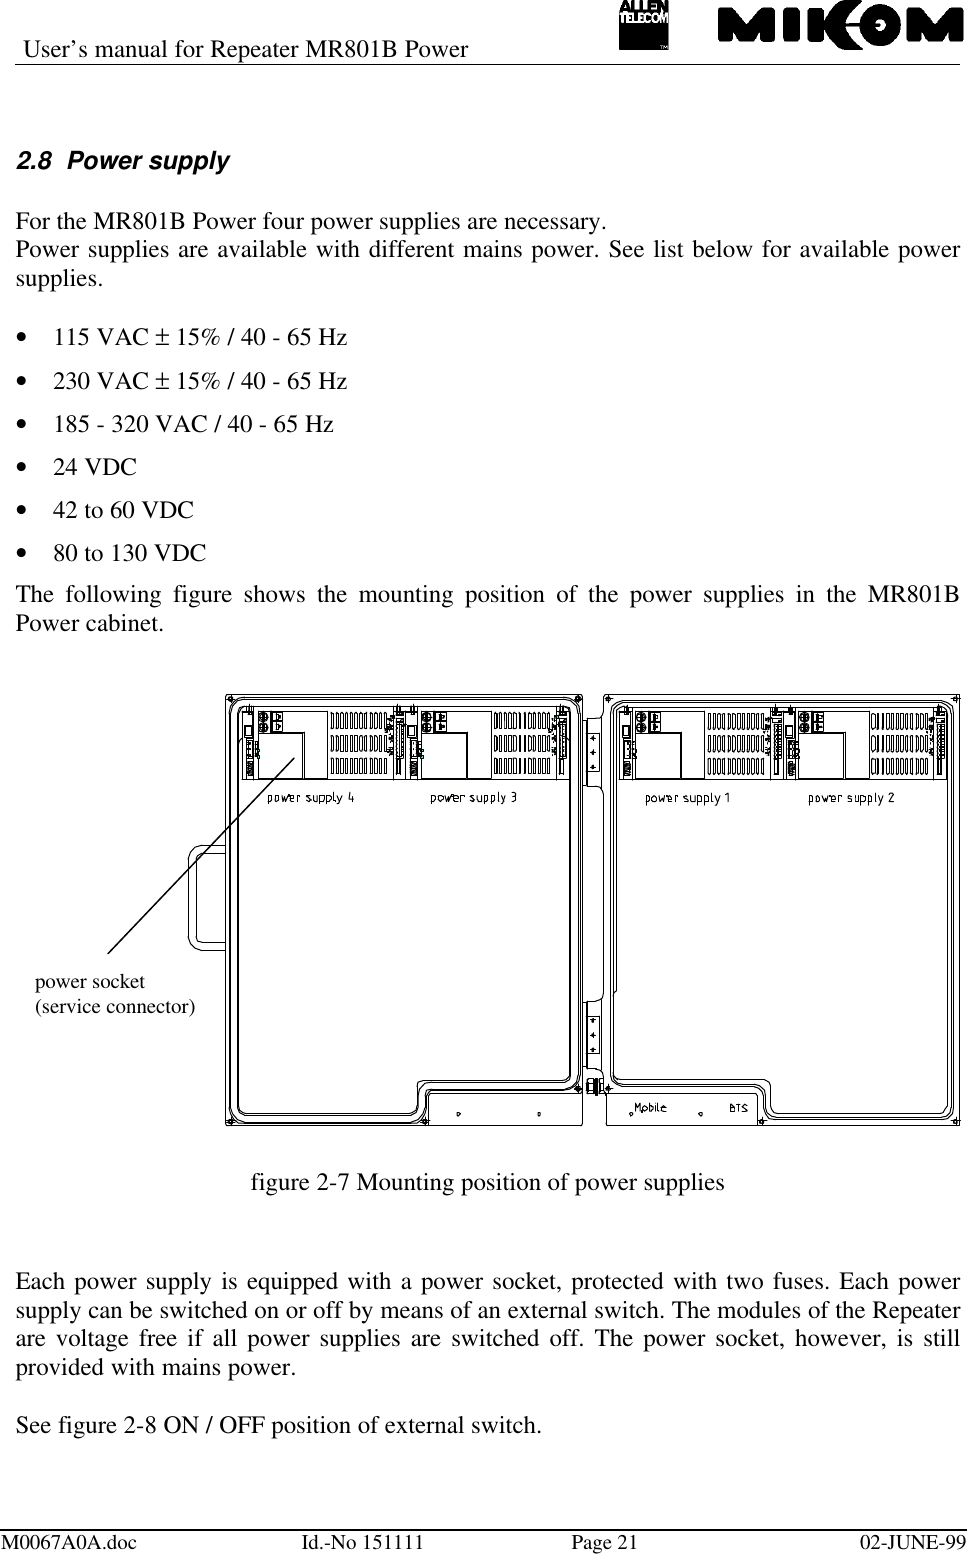 User’s manual for Repeater MR801B PowerM0067A0A.doc Id.-No 151111 Page 21 02-JUNE-992.8 Power supplyFor the MR801B Power four power supplies are necessary.Power supplies are available with different mains power. See list below for available powersupplies.• 115 VAC ± 15% / 40 - 65 Hz• 230 VAC ± 15% / 40 - 65 Hz• 185 - 320 VAC / 40 - 65 Hz• 24 VDC• 42 to 60 VDC• 80 to 130 VDCThe following figure shows the mounting position of the power supplies in the MR801BPower cabinet.figure 2-7 Mounting position of power suppliesEach power supply is equipped with a power socket, protected with two fuses. Each powersupply can be switched on or off by means of an external switch. The modules of the Repeaterare voltage free if all power supplies are switched off. The power socket, however, is stillprovided with mains power.See figure 2-8 ON / OFF position of external switch.power socket(service connector)